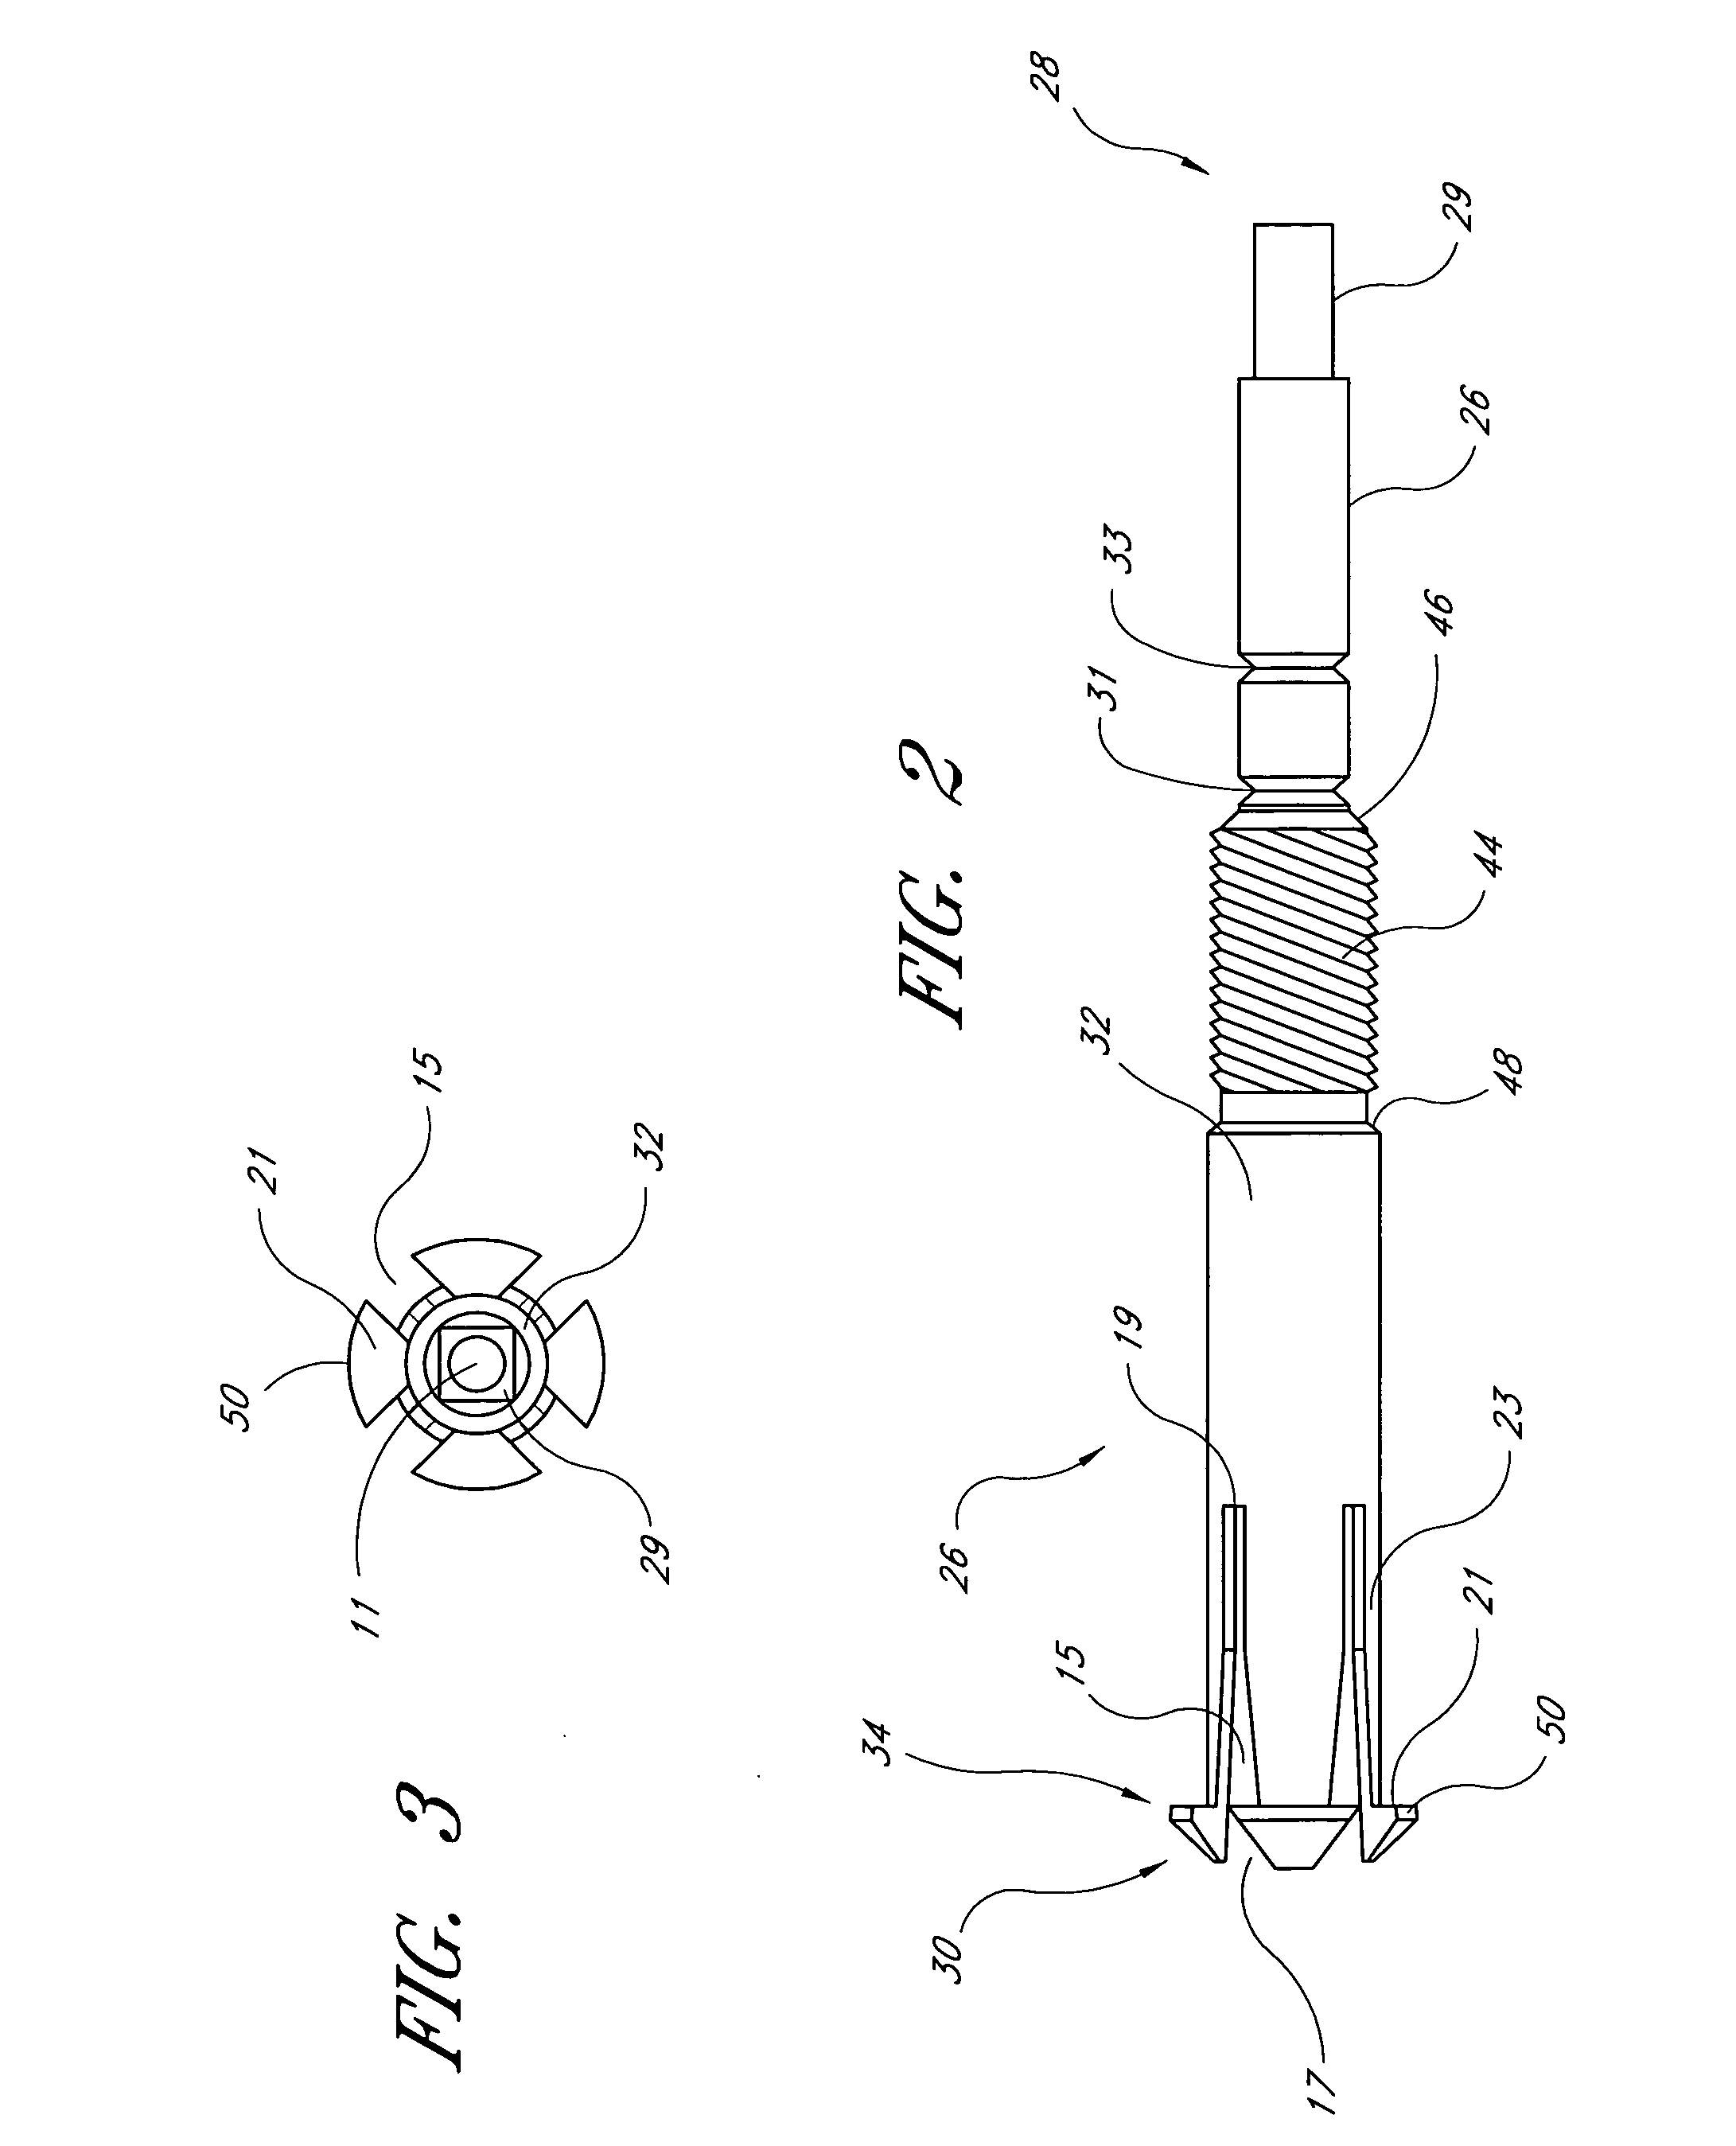 Proximal anchors for bone fixation system